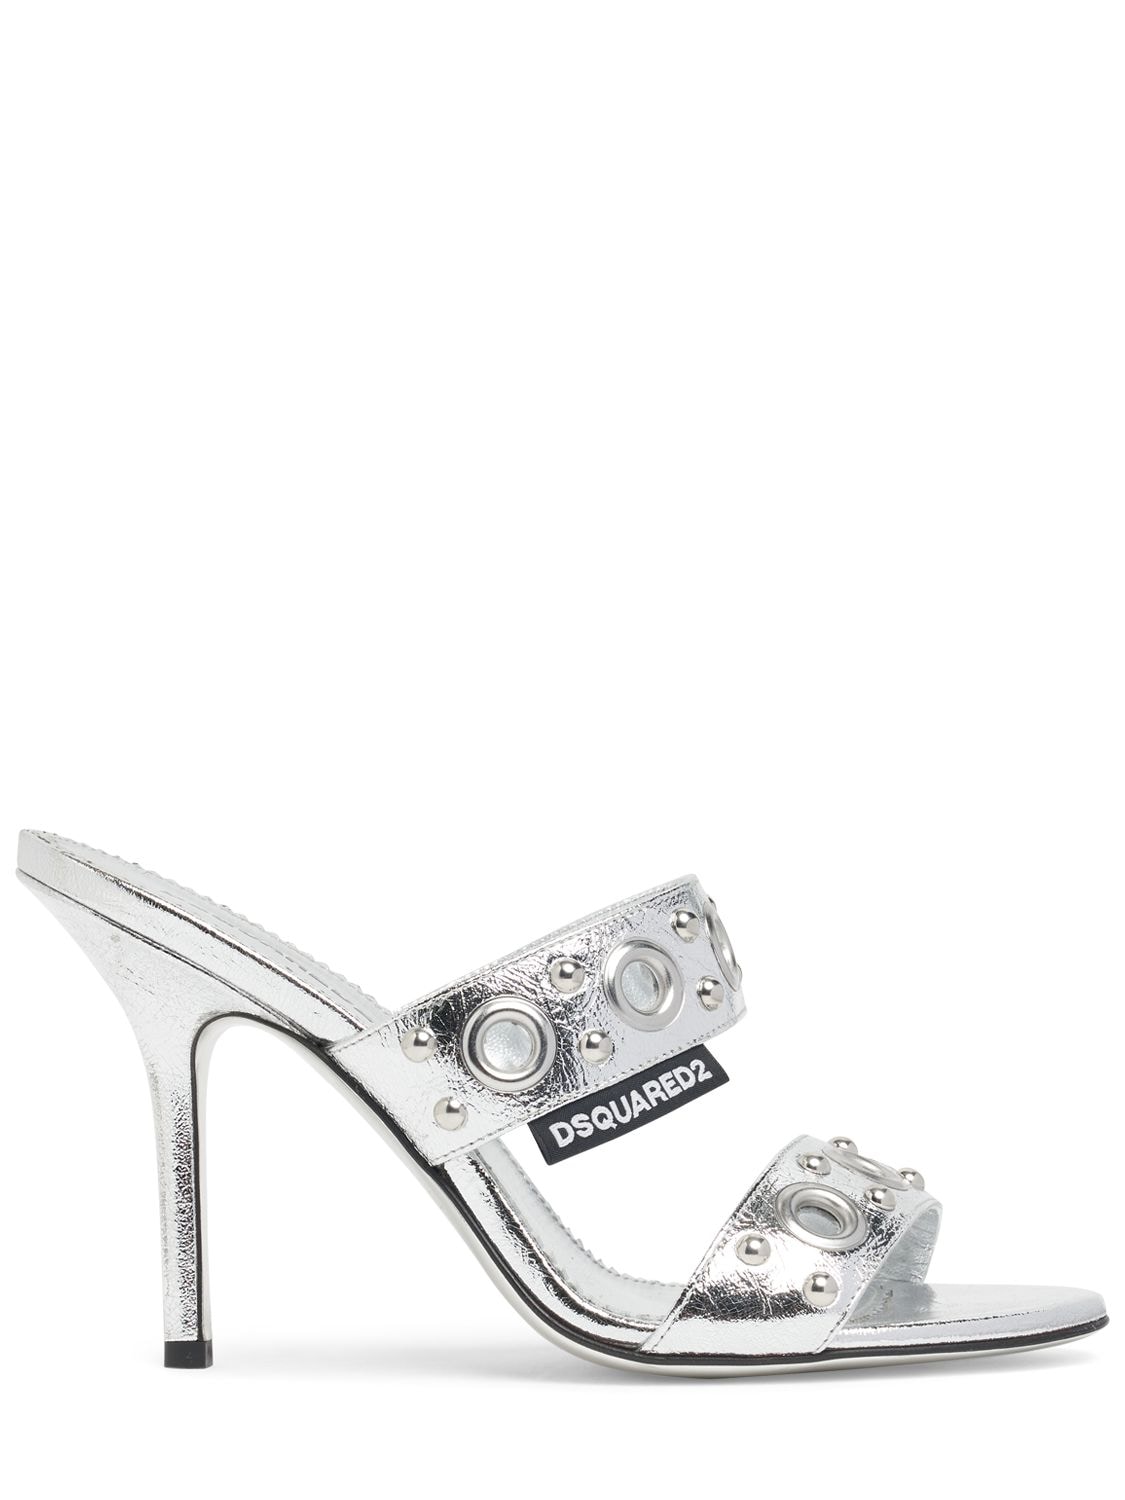 Shop Dsquared2 110mm Laminated Mule Sandals In Silver